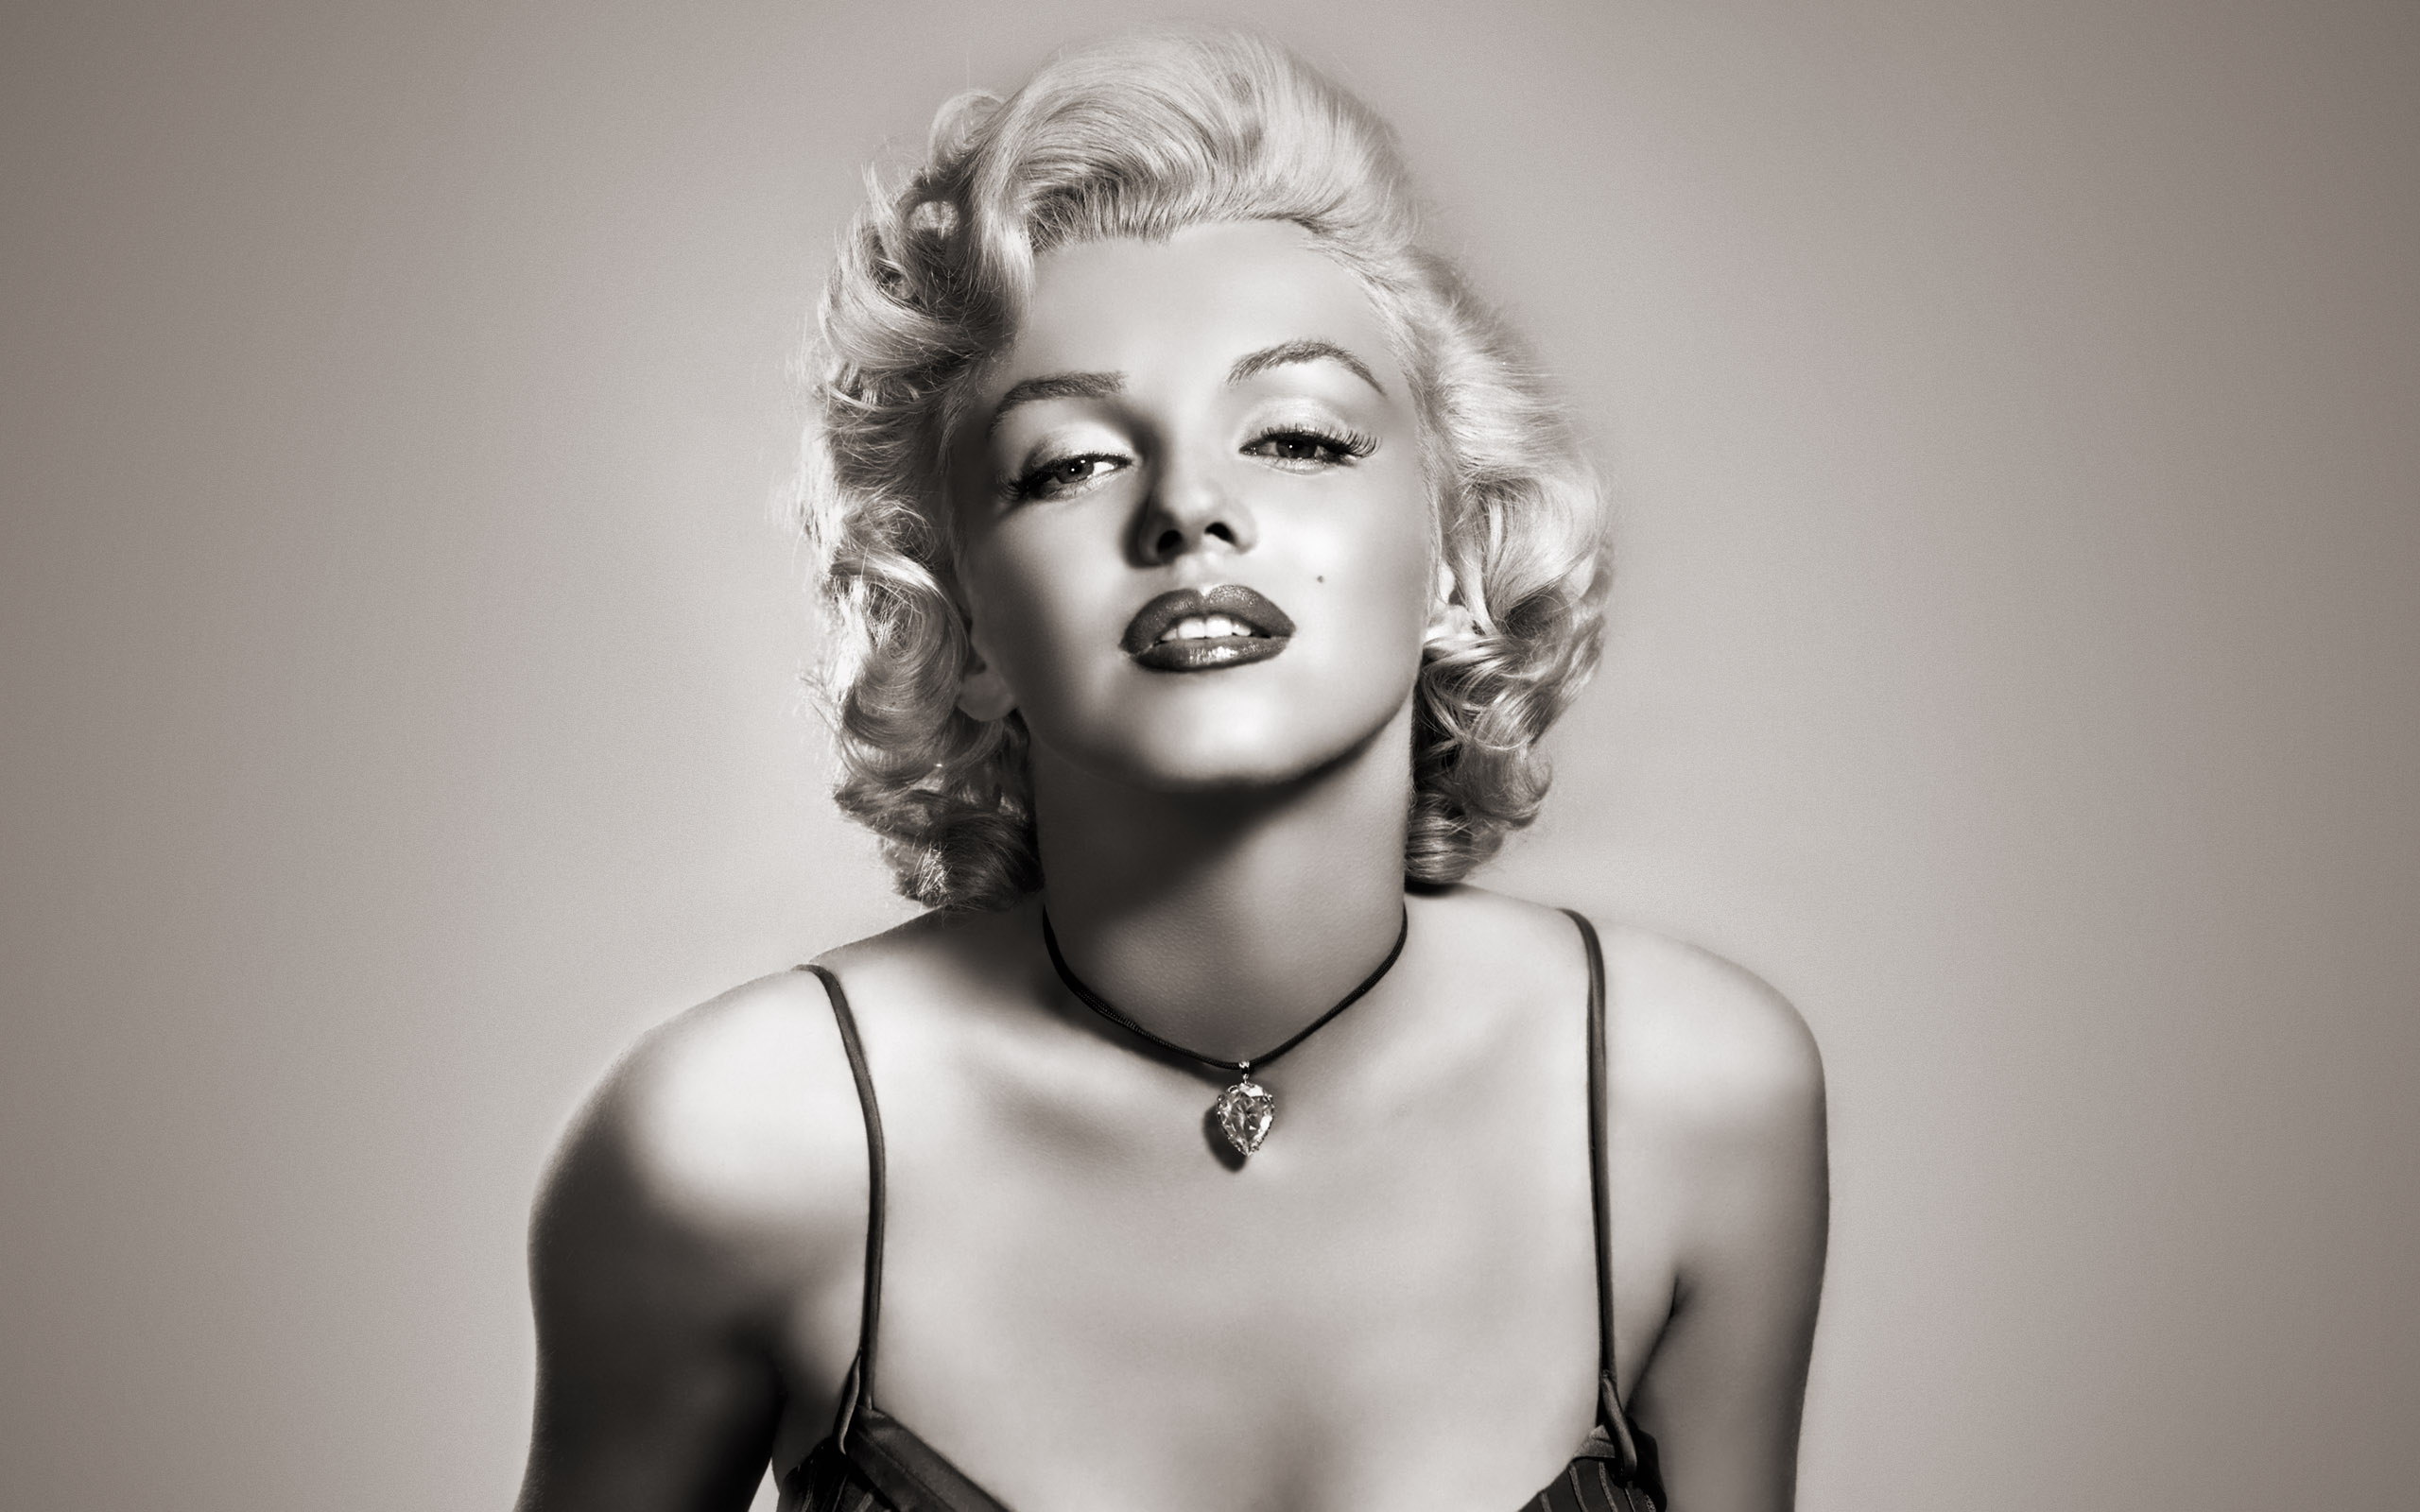 THE MARILYN MONROE COSMETIC LINE IS BORN - Stefano Cigana